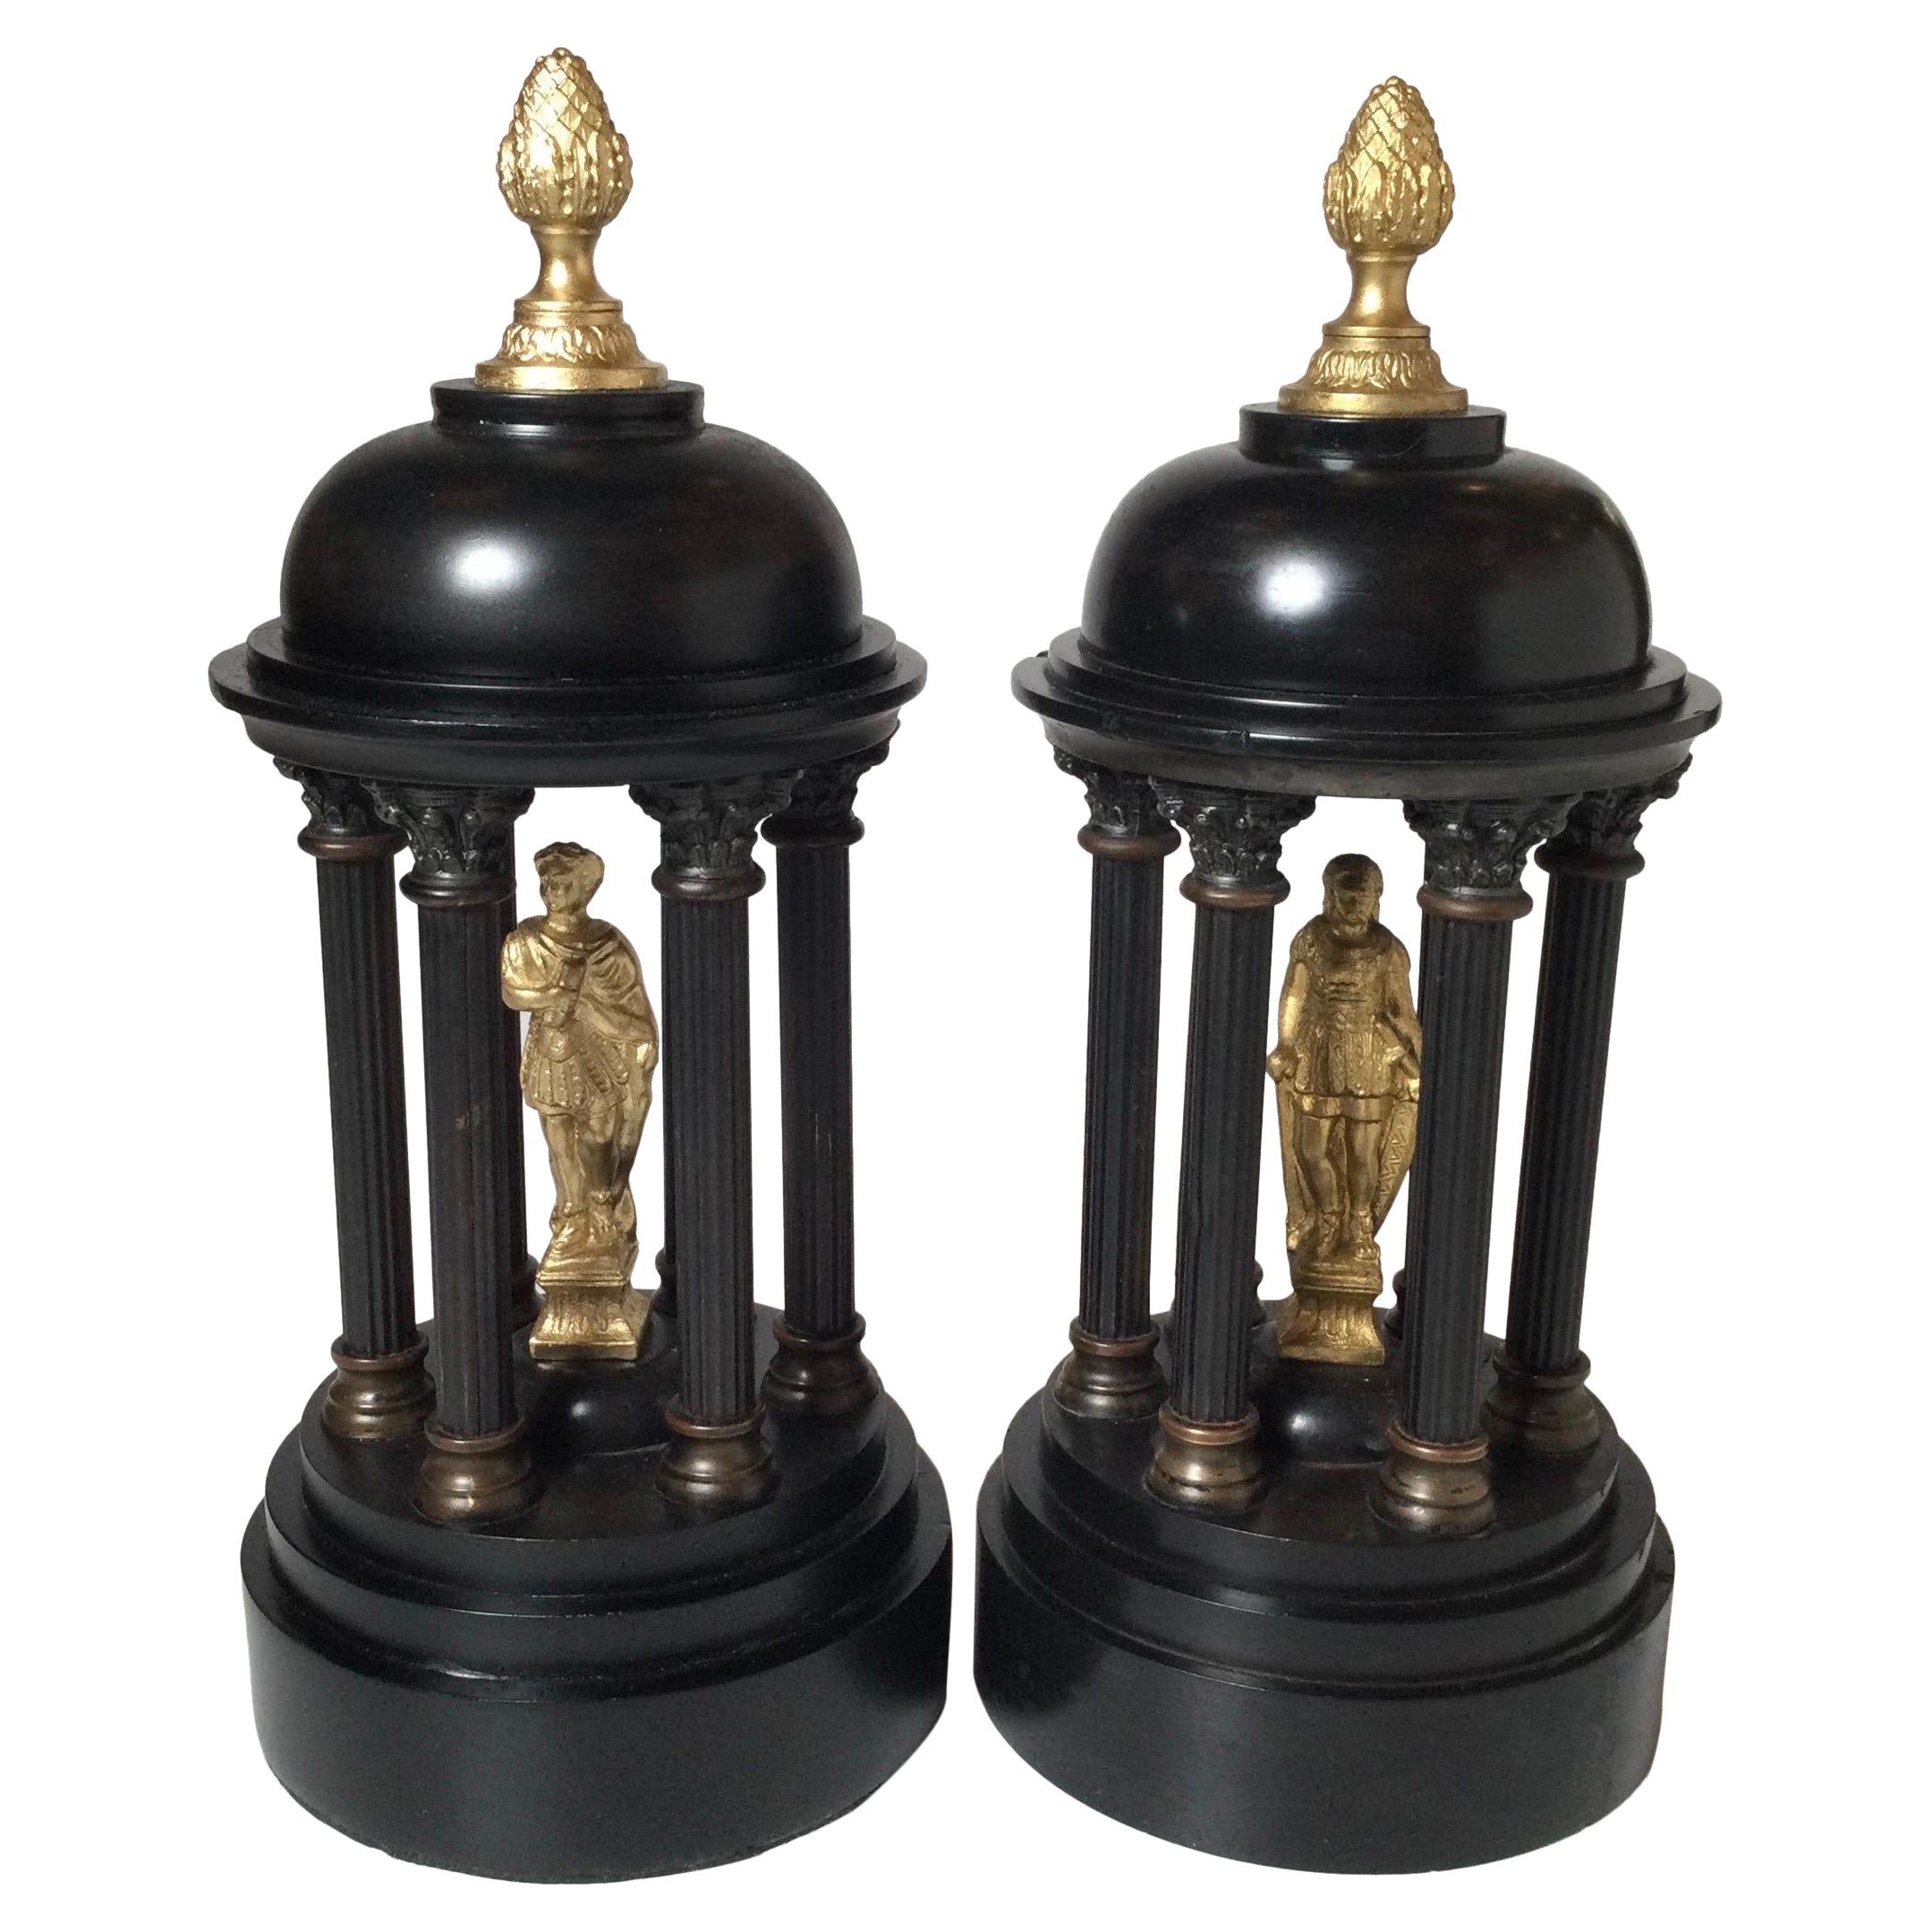 Pair of Gilt Bronze and Belgian Slate Temple Garnitures, 19th Century